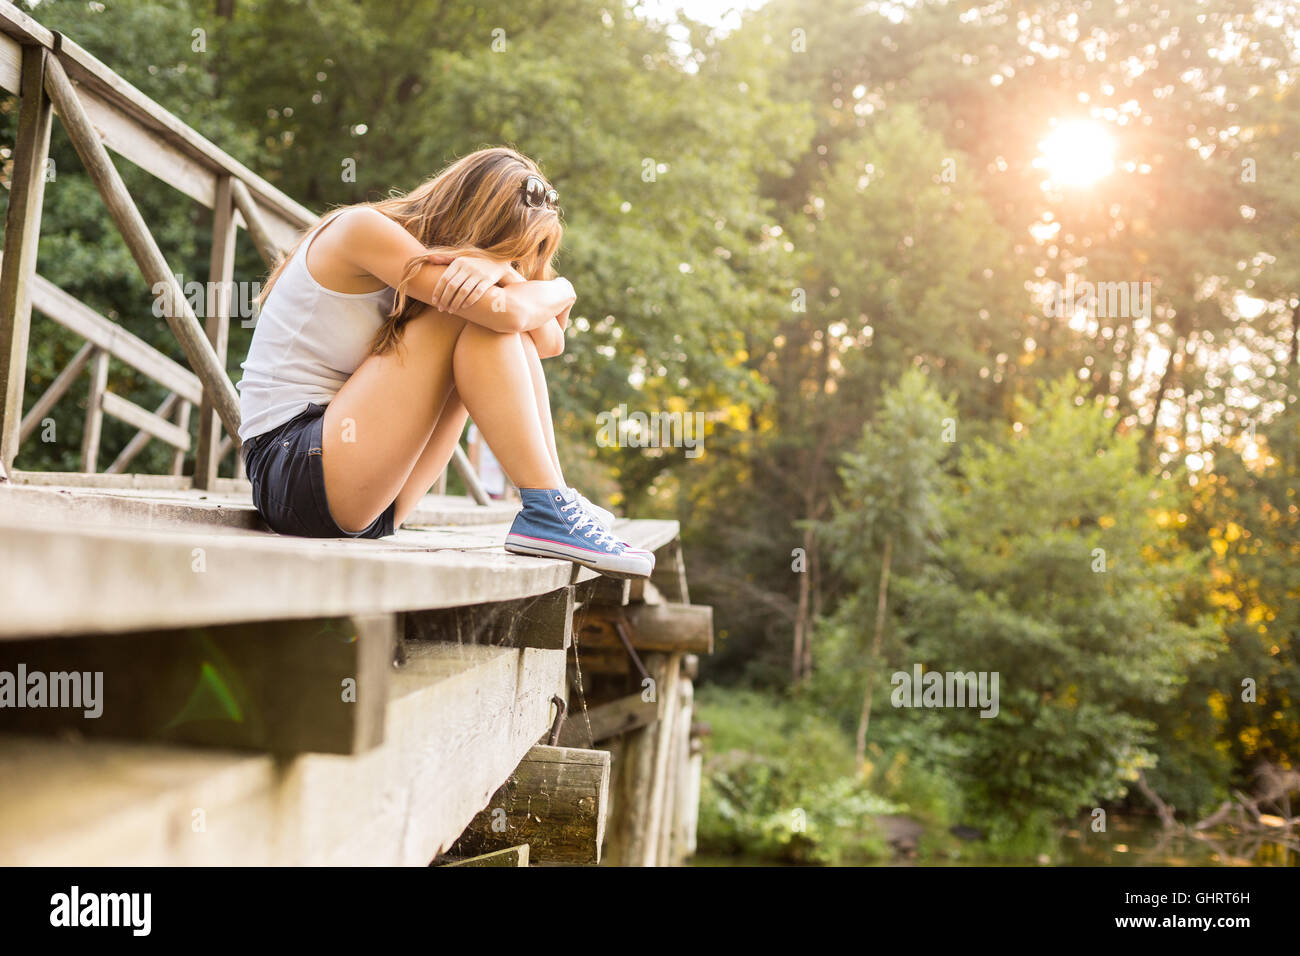 Young sad woman with beautiful sporty legs sitting on a wooden bridge railing in jeans sneakers Stock Photo